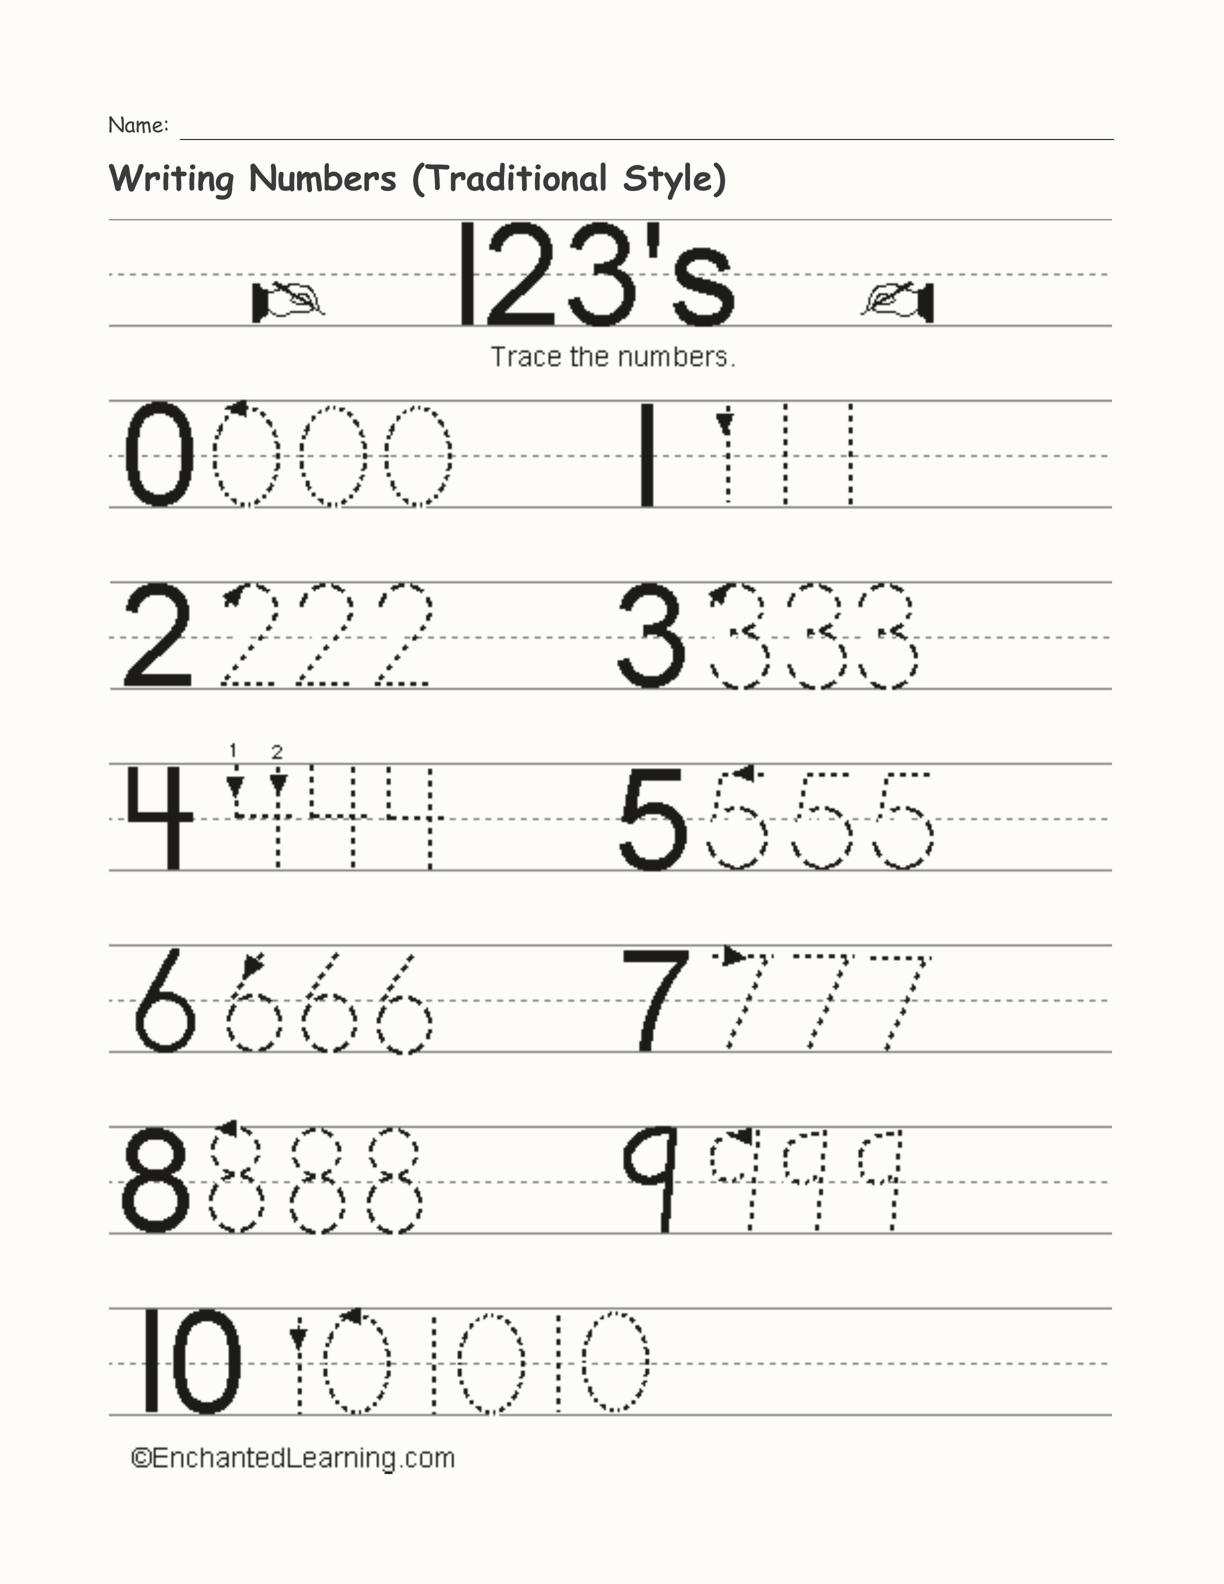 Writing Numbers (Traditional Style) interactive worksheet page 1